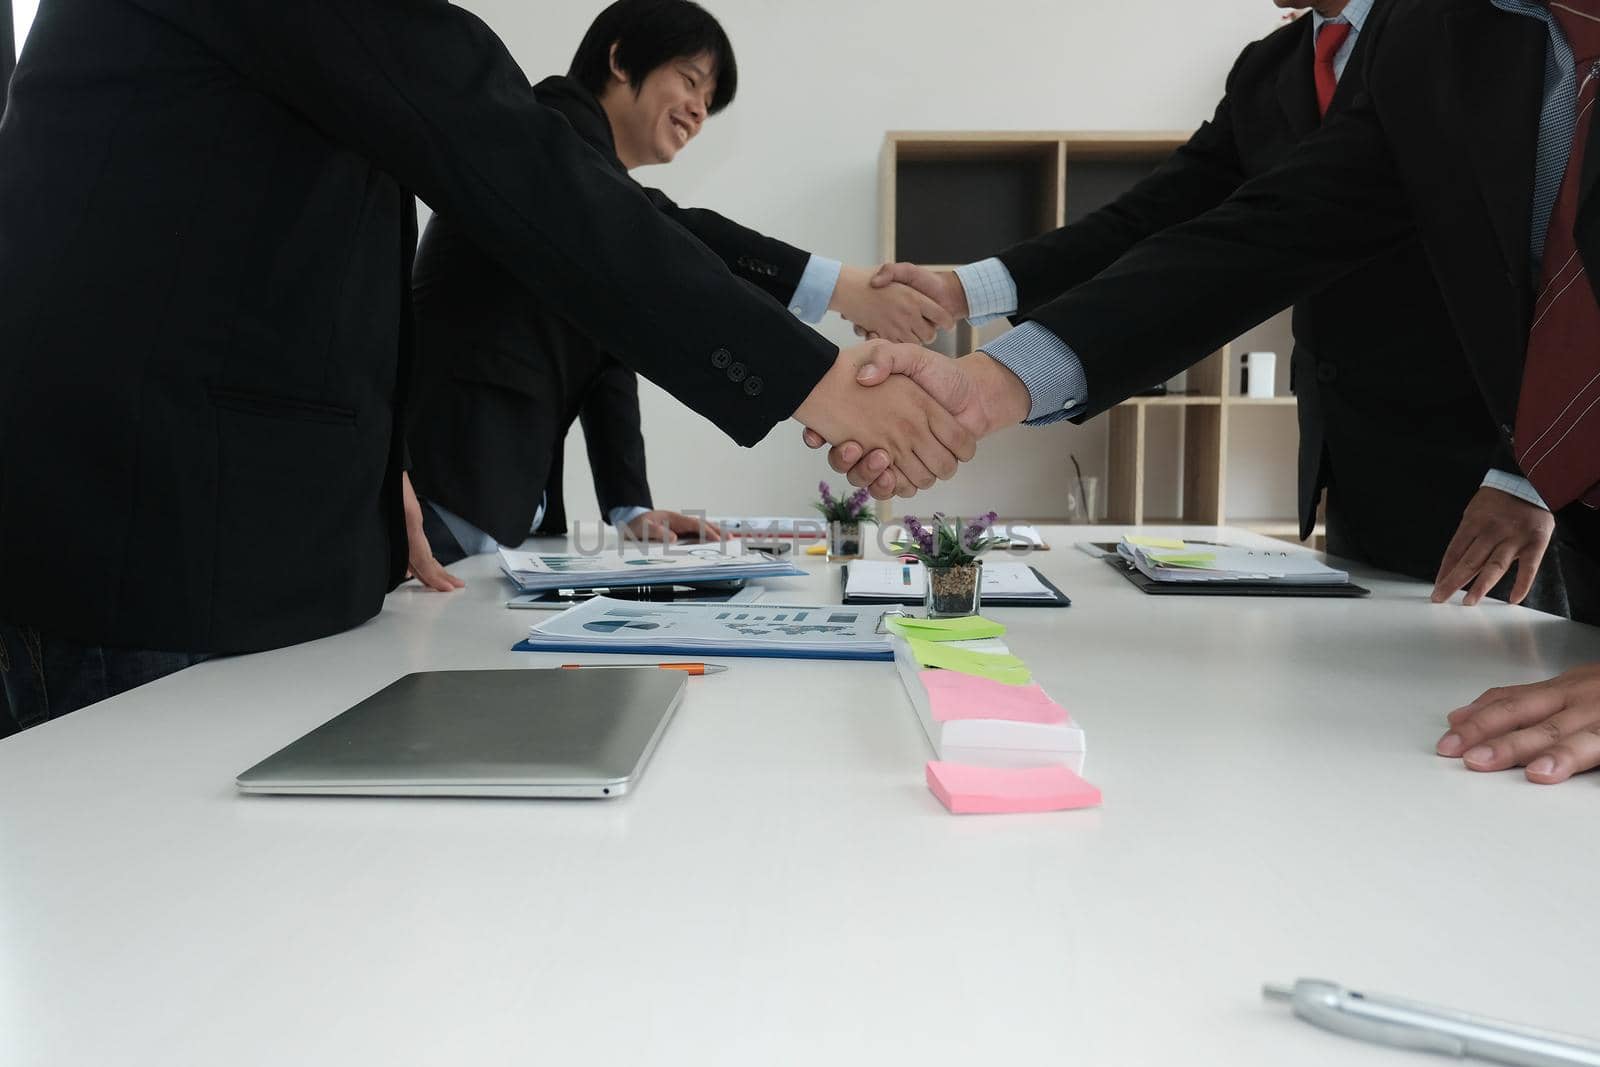 Business people shaking hands after finishing up a meeting. Two colleagues handshaking after conference. Greeting deal, teamwork, partnership, corporate concept.